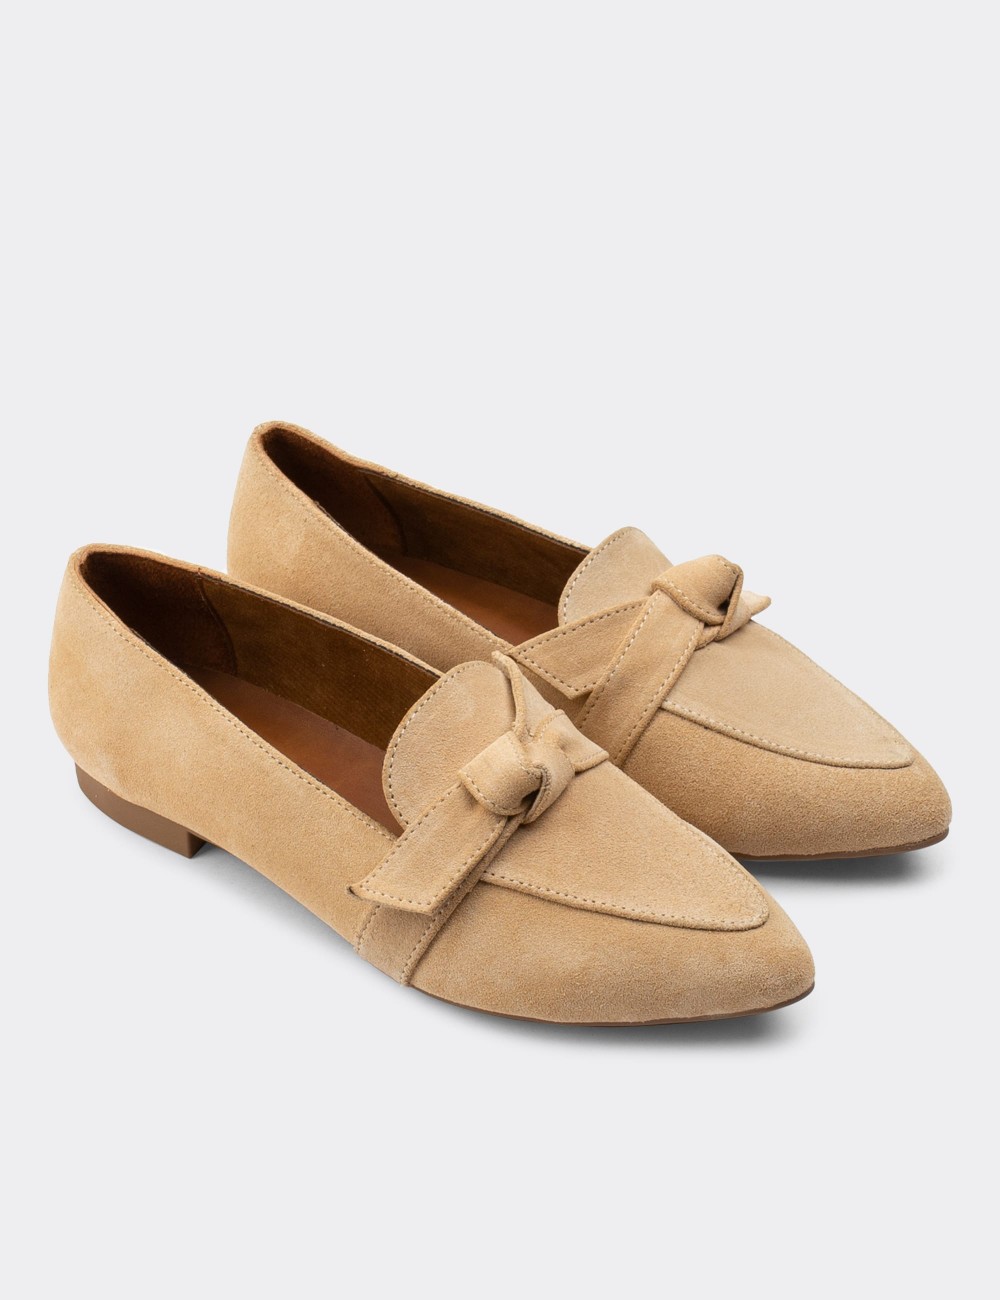 Beige Suede Leather Loafers - 01898ZBEJC01